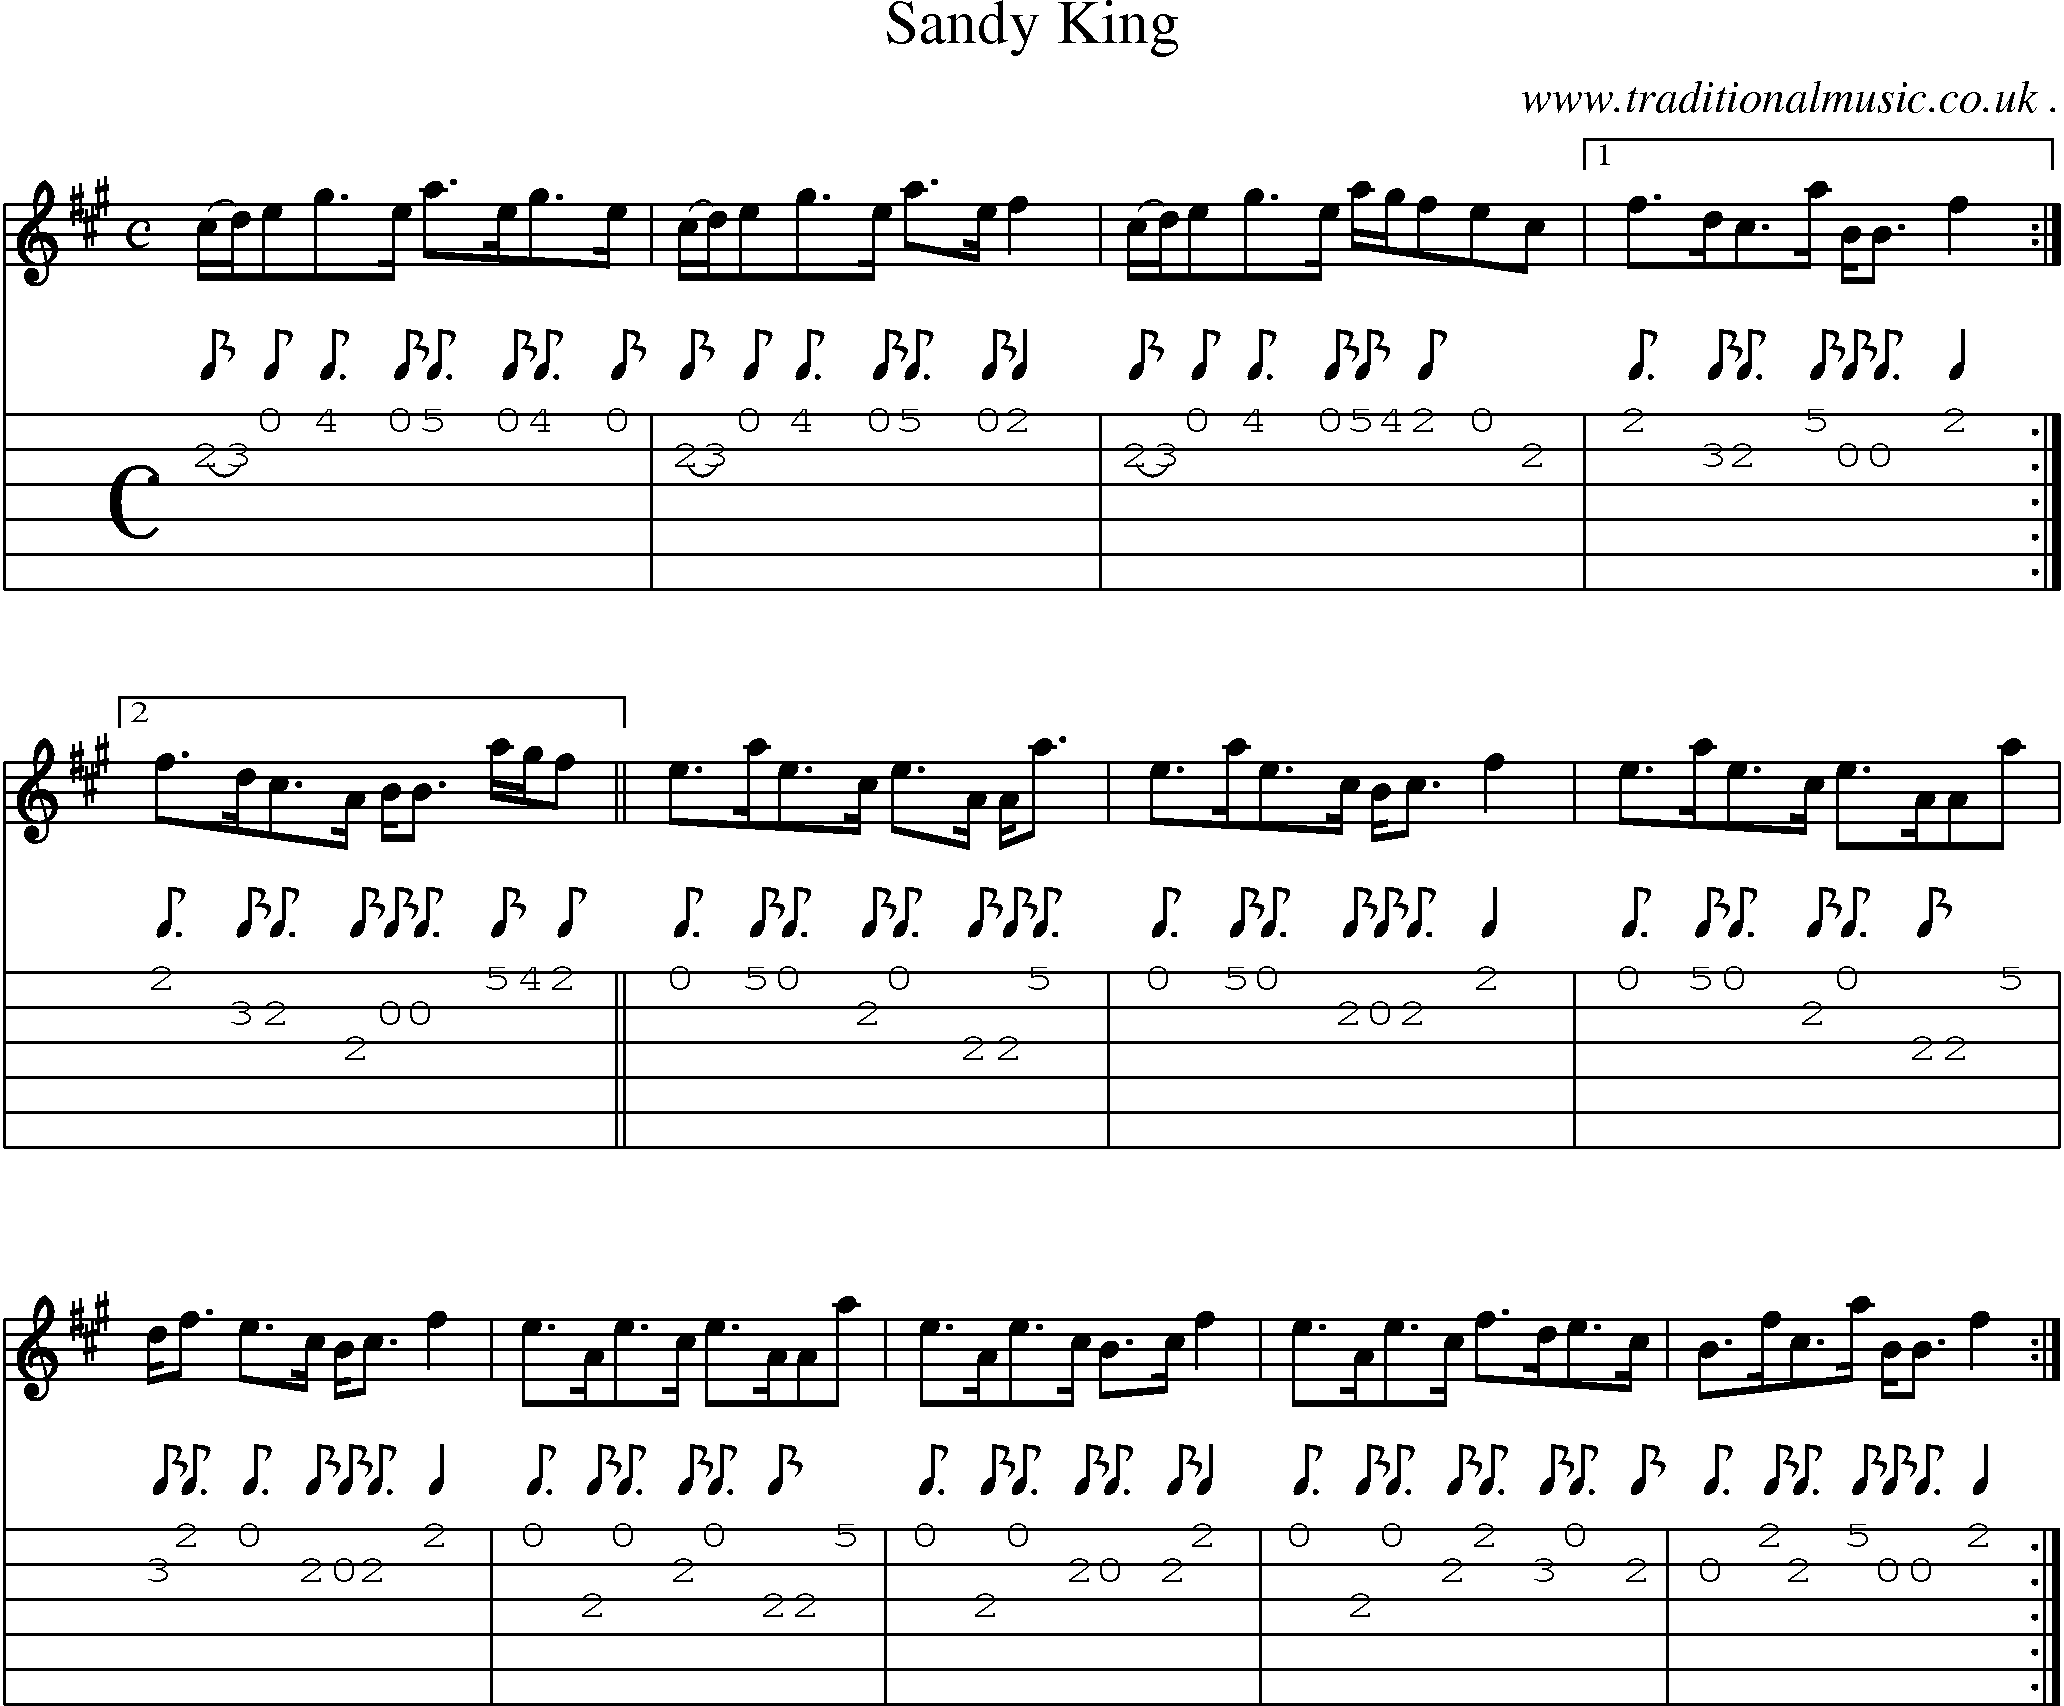 Sheet-music  score, Chords and Guitar Tabs for Sandy King